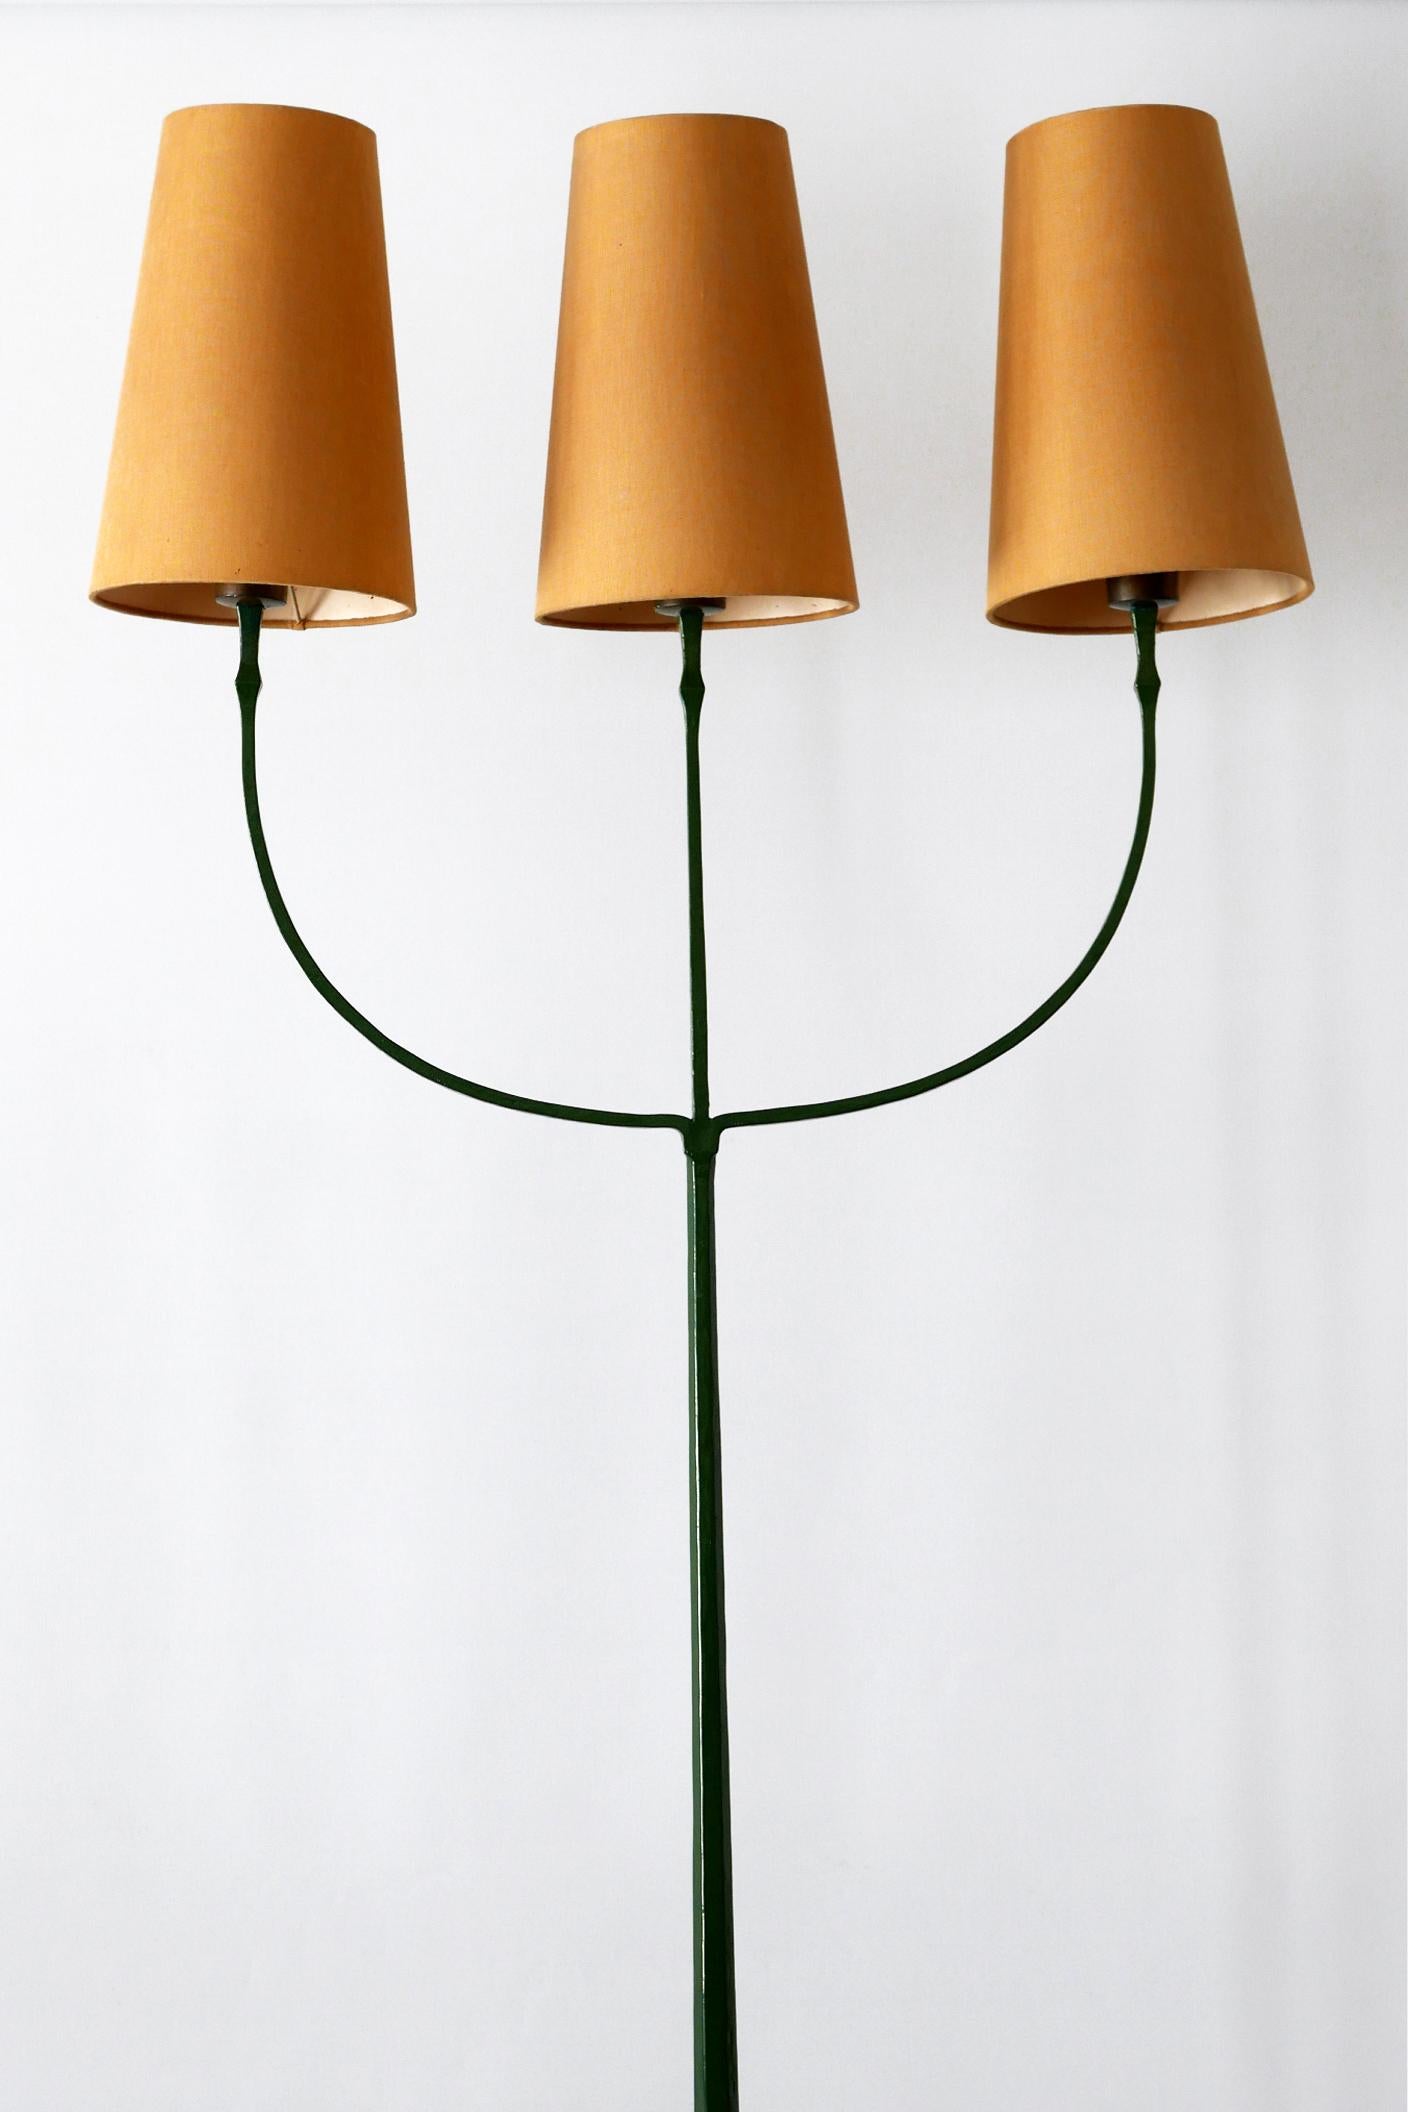 French Exceptional Mid-Century Modern Three Flamed Floor Lamp, 1950s For Sale